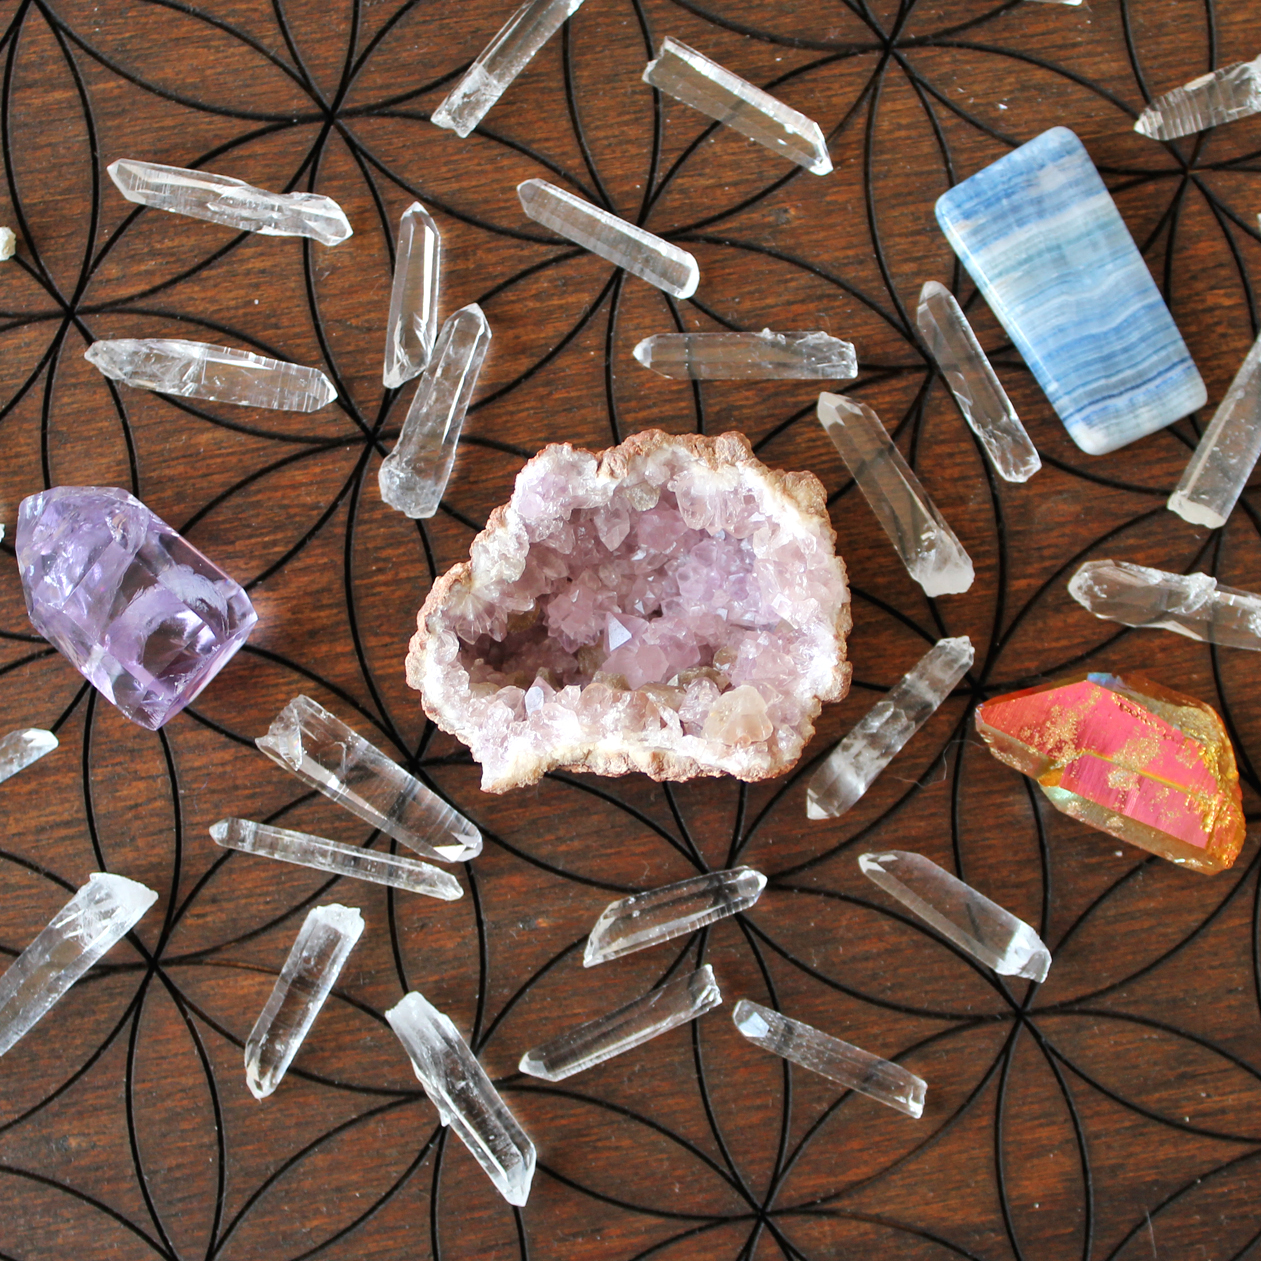 Crystal grids need clear intentions